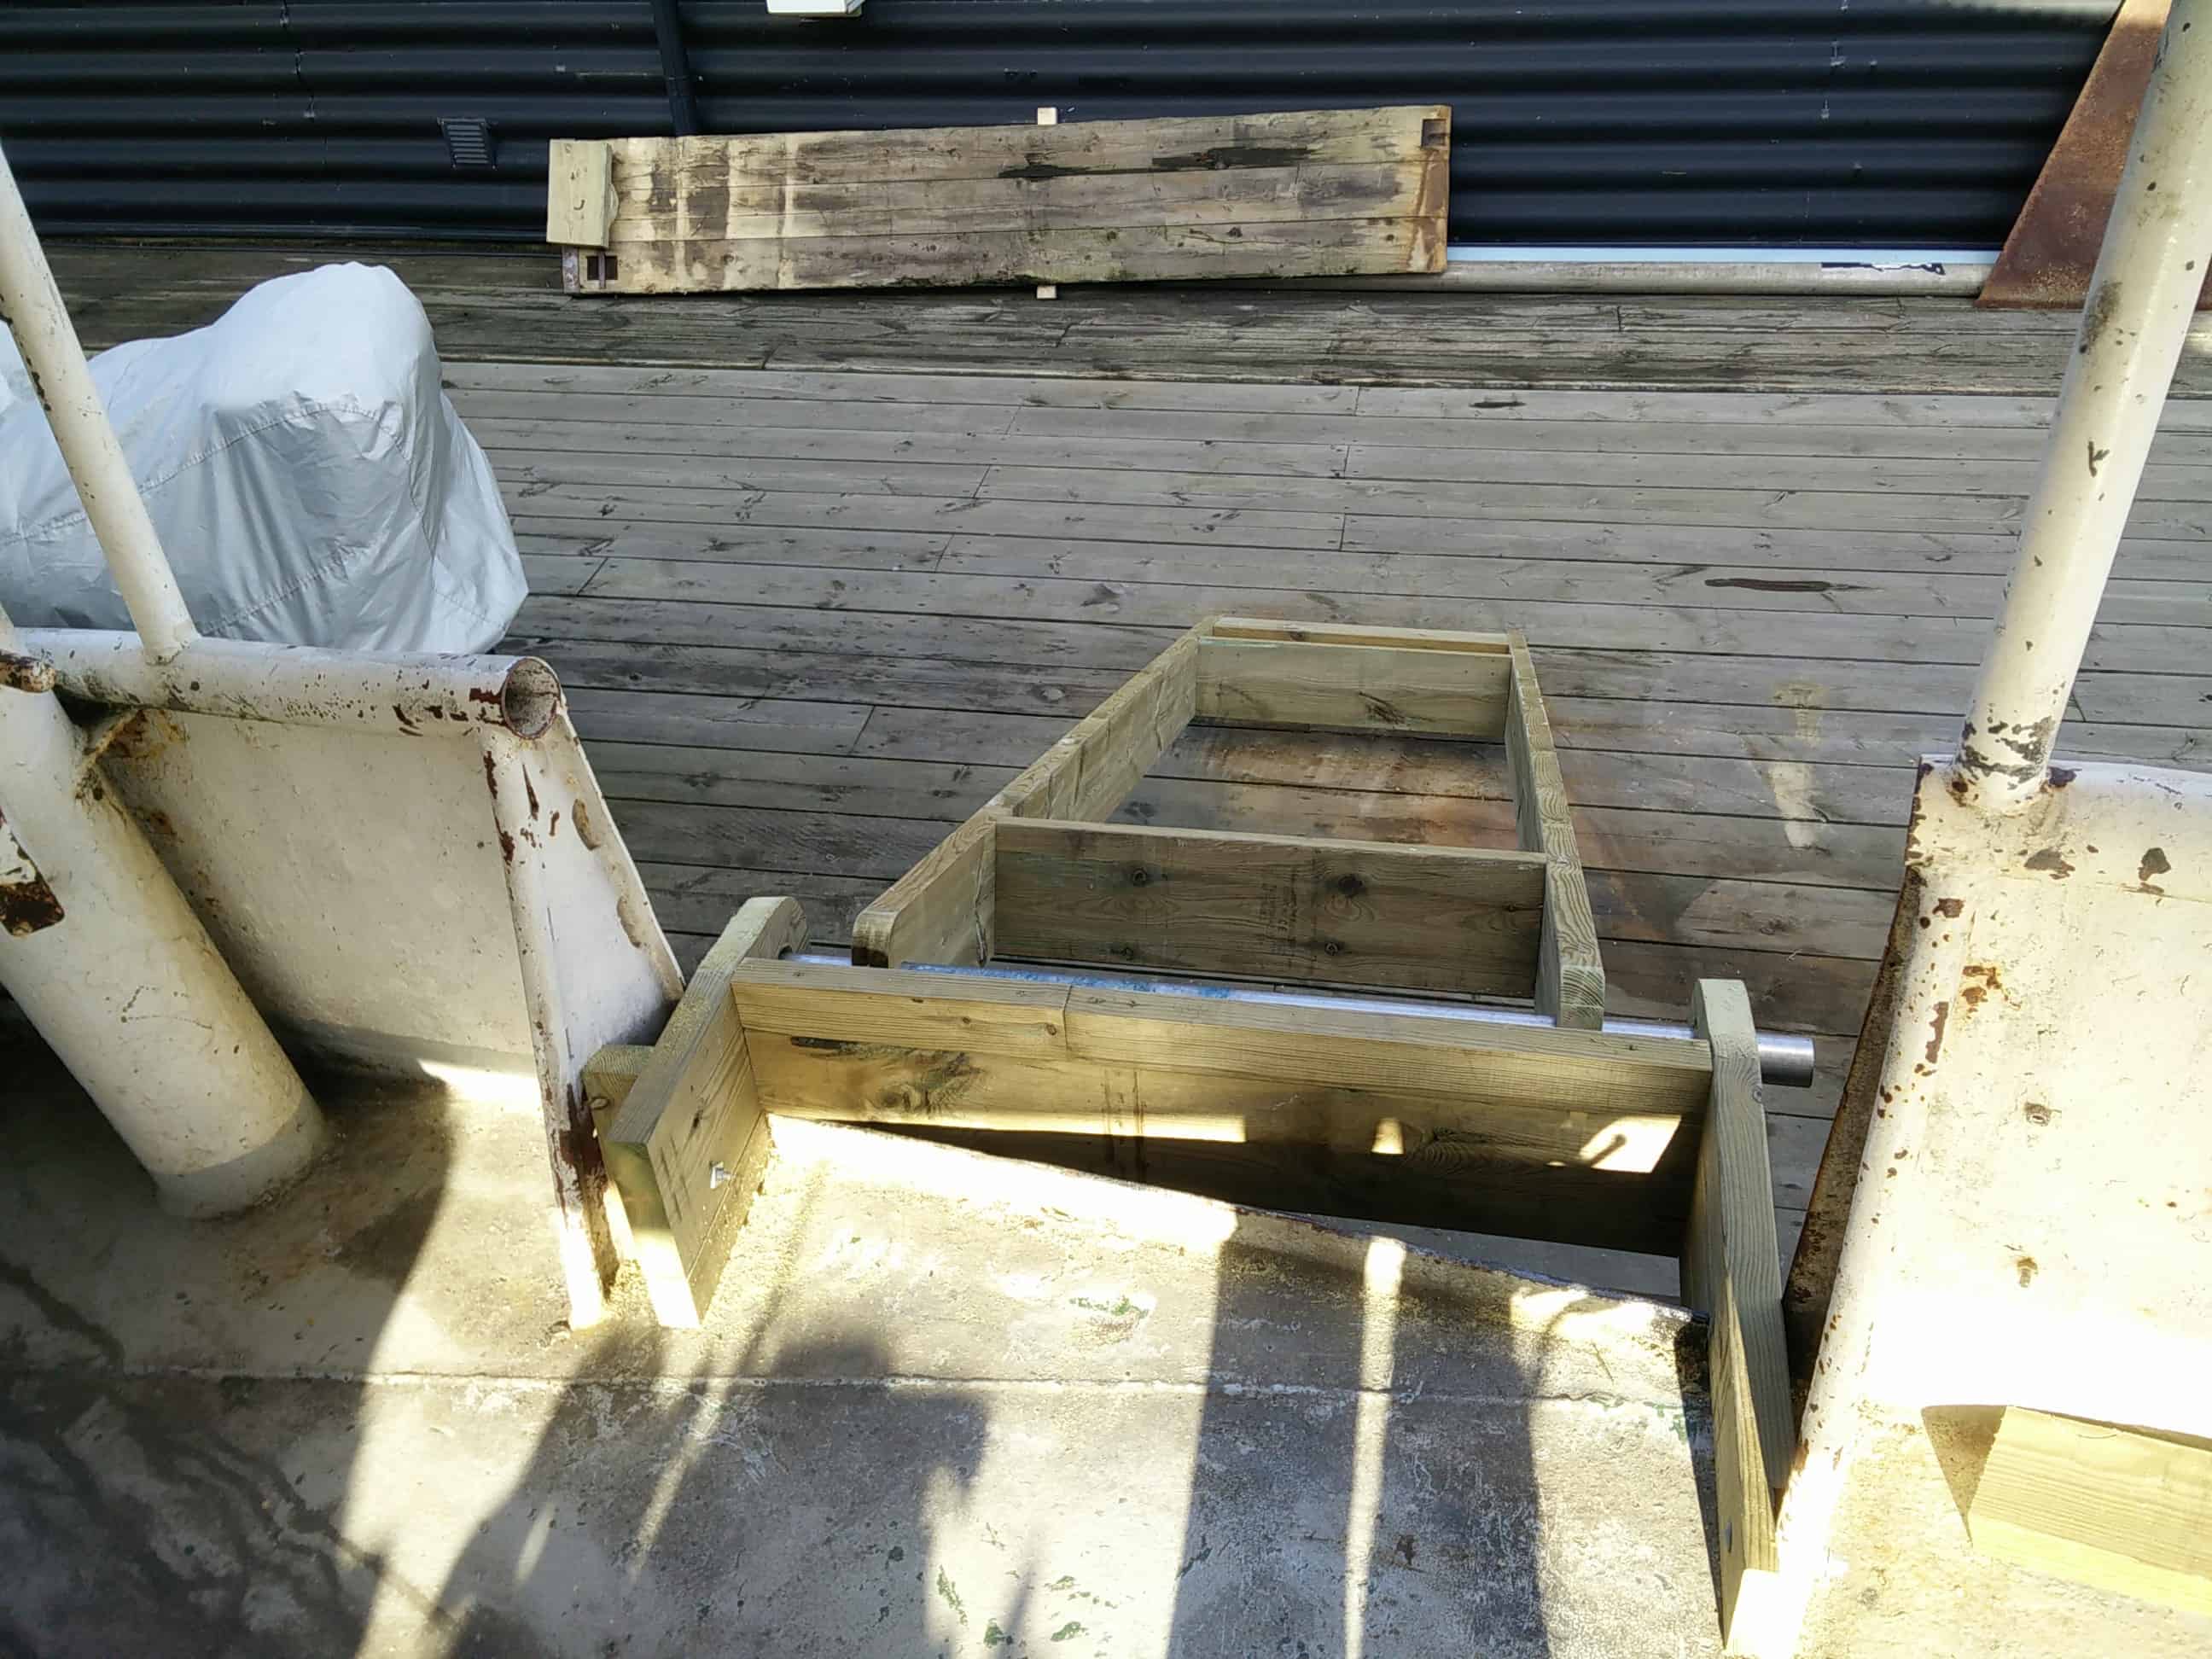 The frame for the gangplank is in place